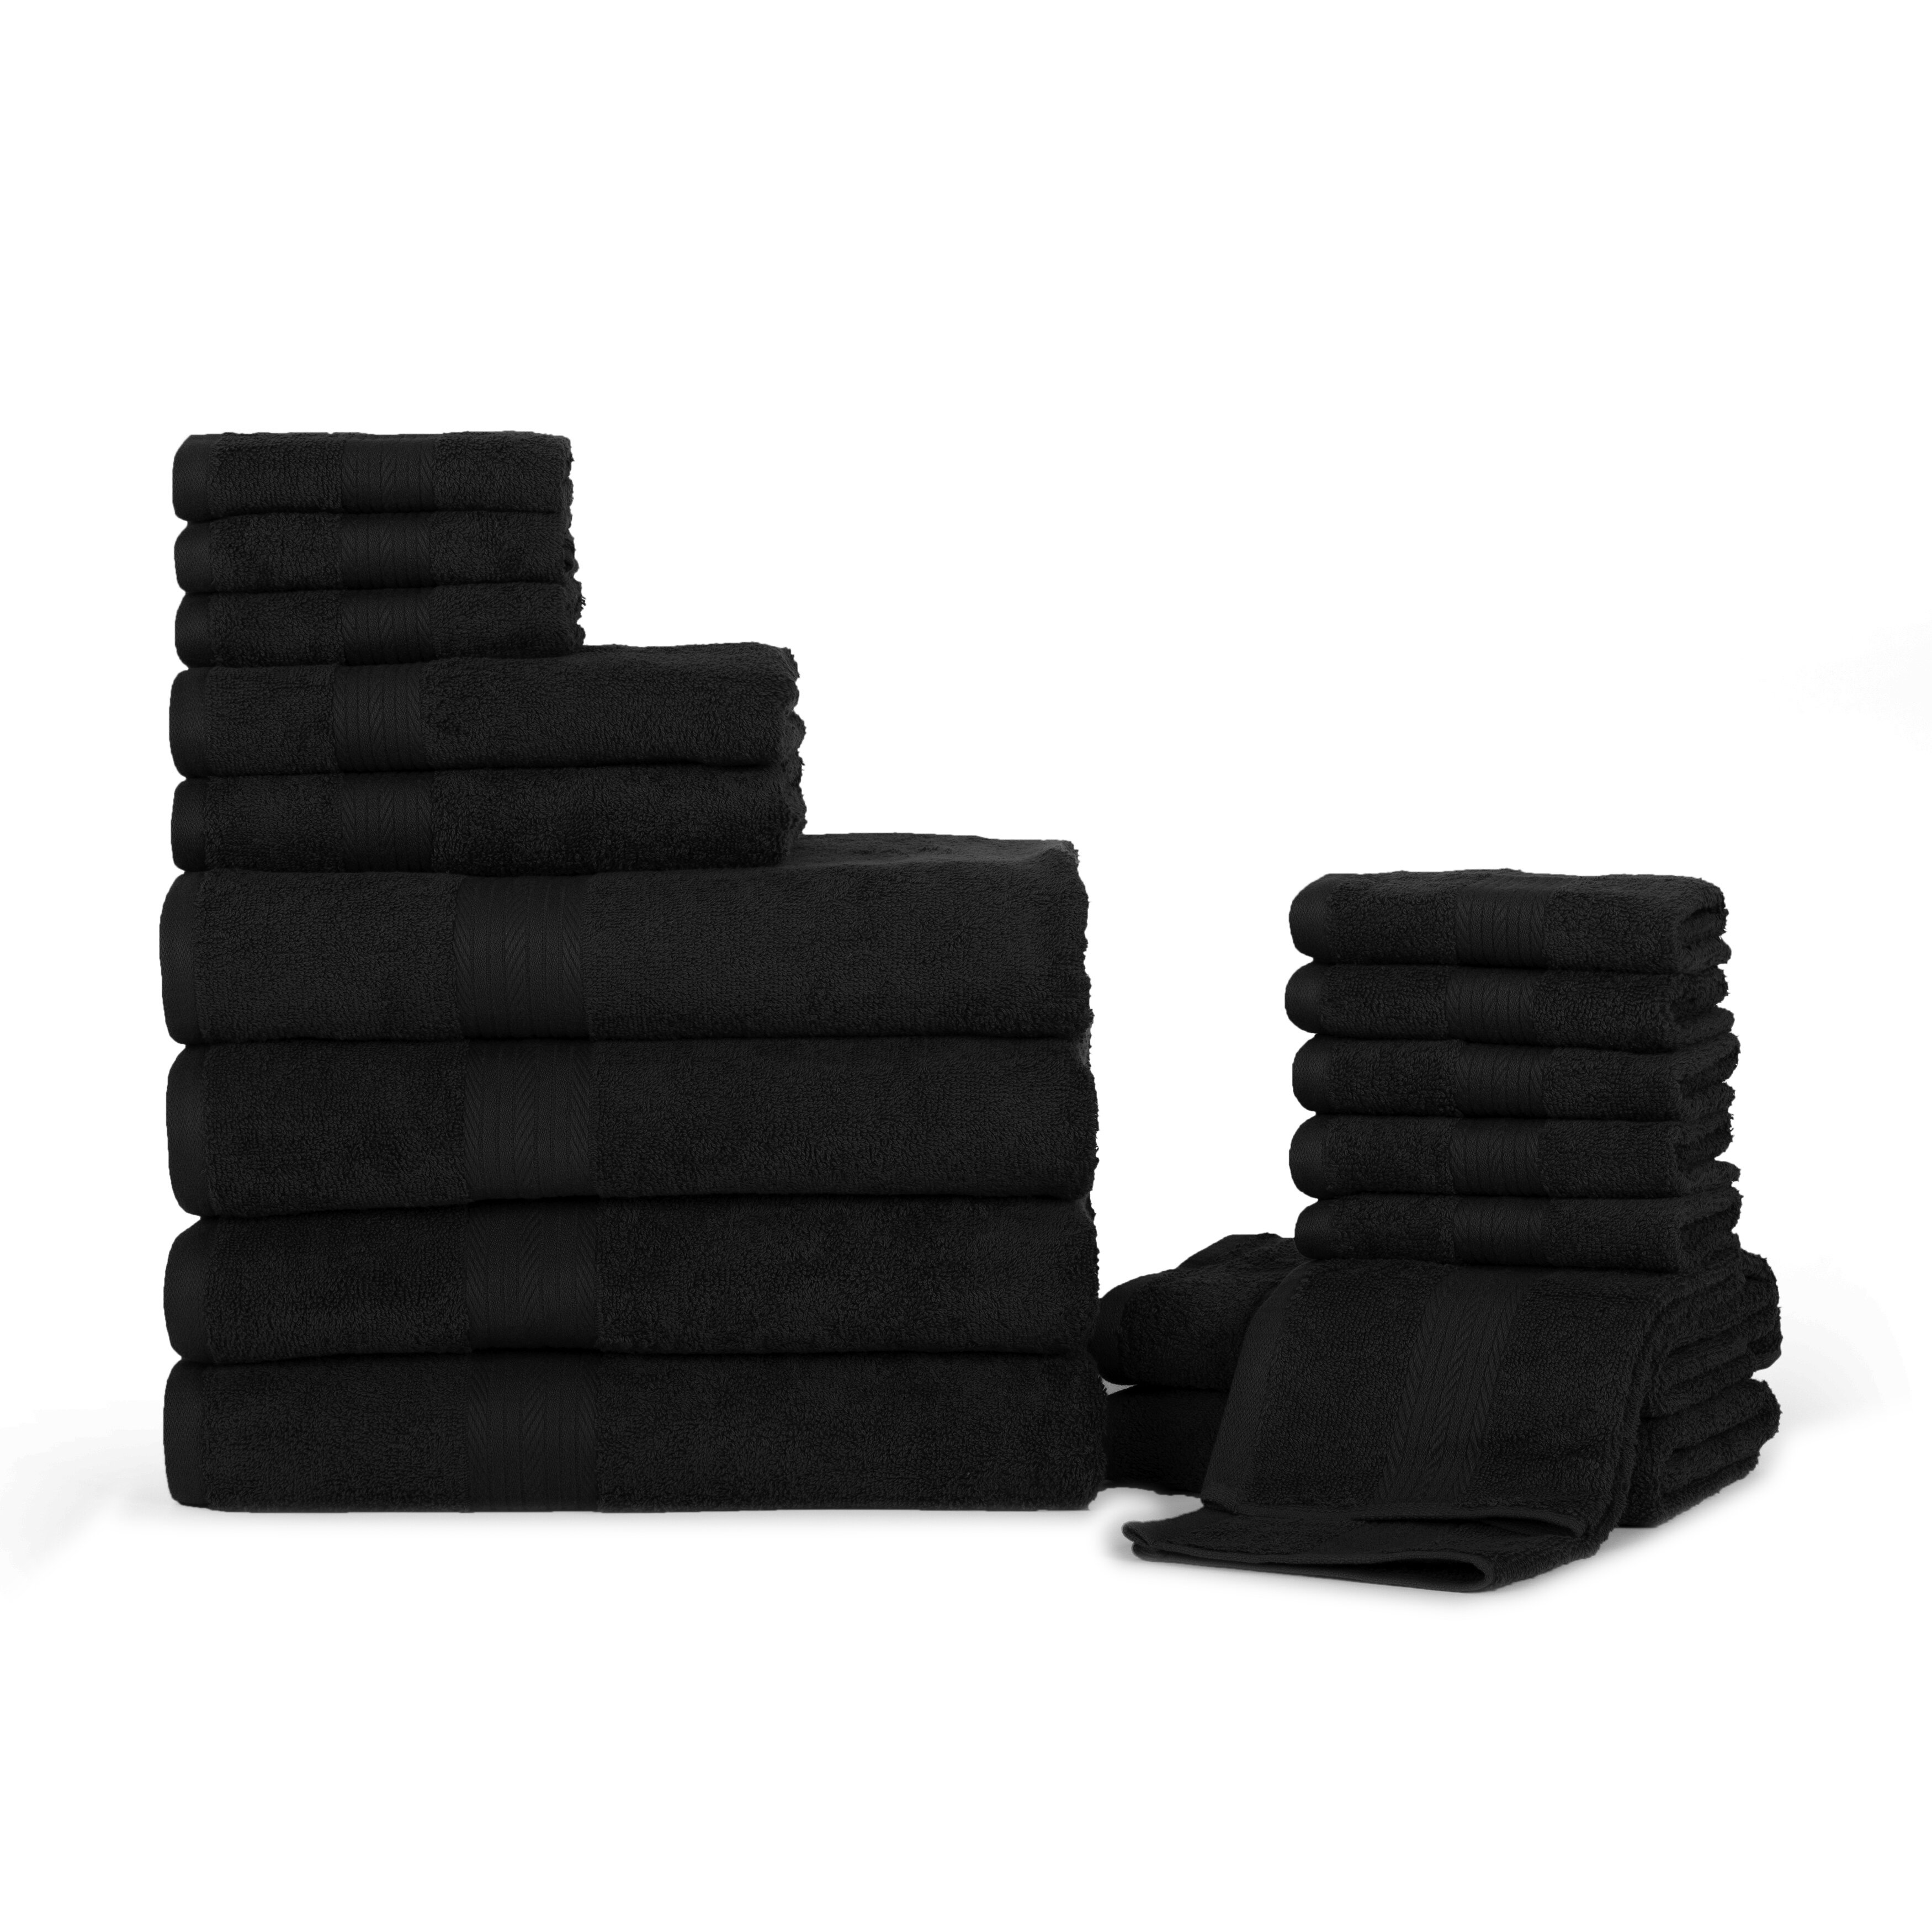 Luxury Bath Towels| 100% Cotton| Ultra Soft, Plush, Thick, Fluffy, Highly  Absorbent, Quick Dry| Home, Gym, Hotel, Shower, Spa | Large Towel Set for